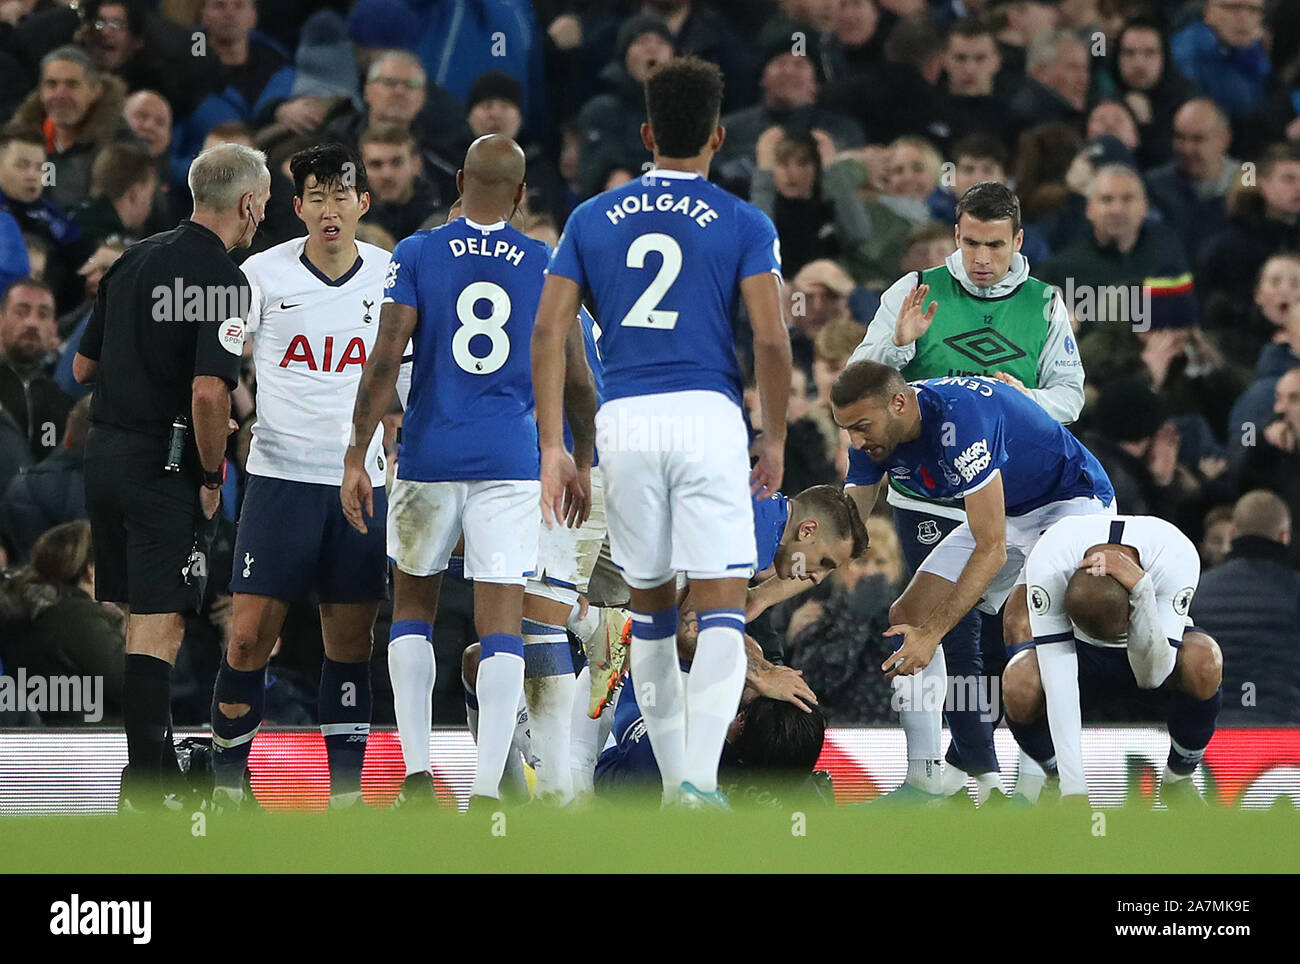 Everton check on the condition of team-mate Andre Gomes after a challenge during the Premier League match at Goodison Park, Liverpool. Stock Photo